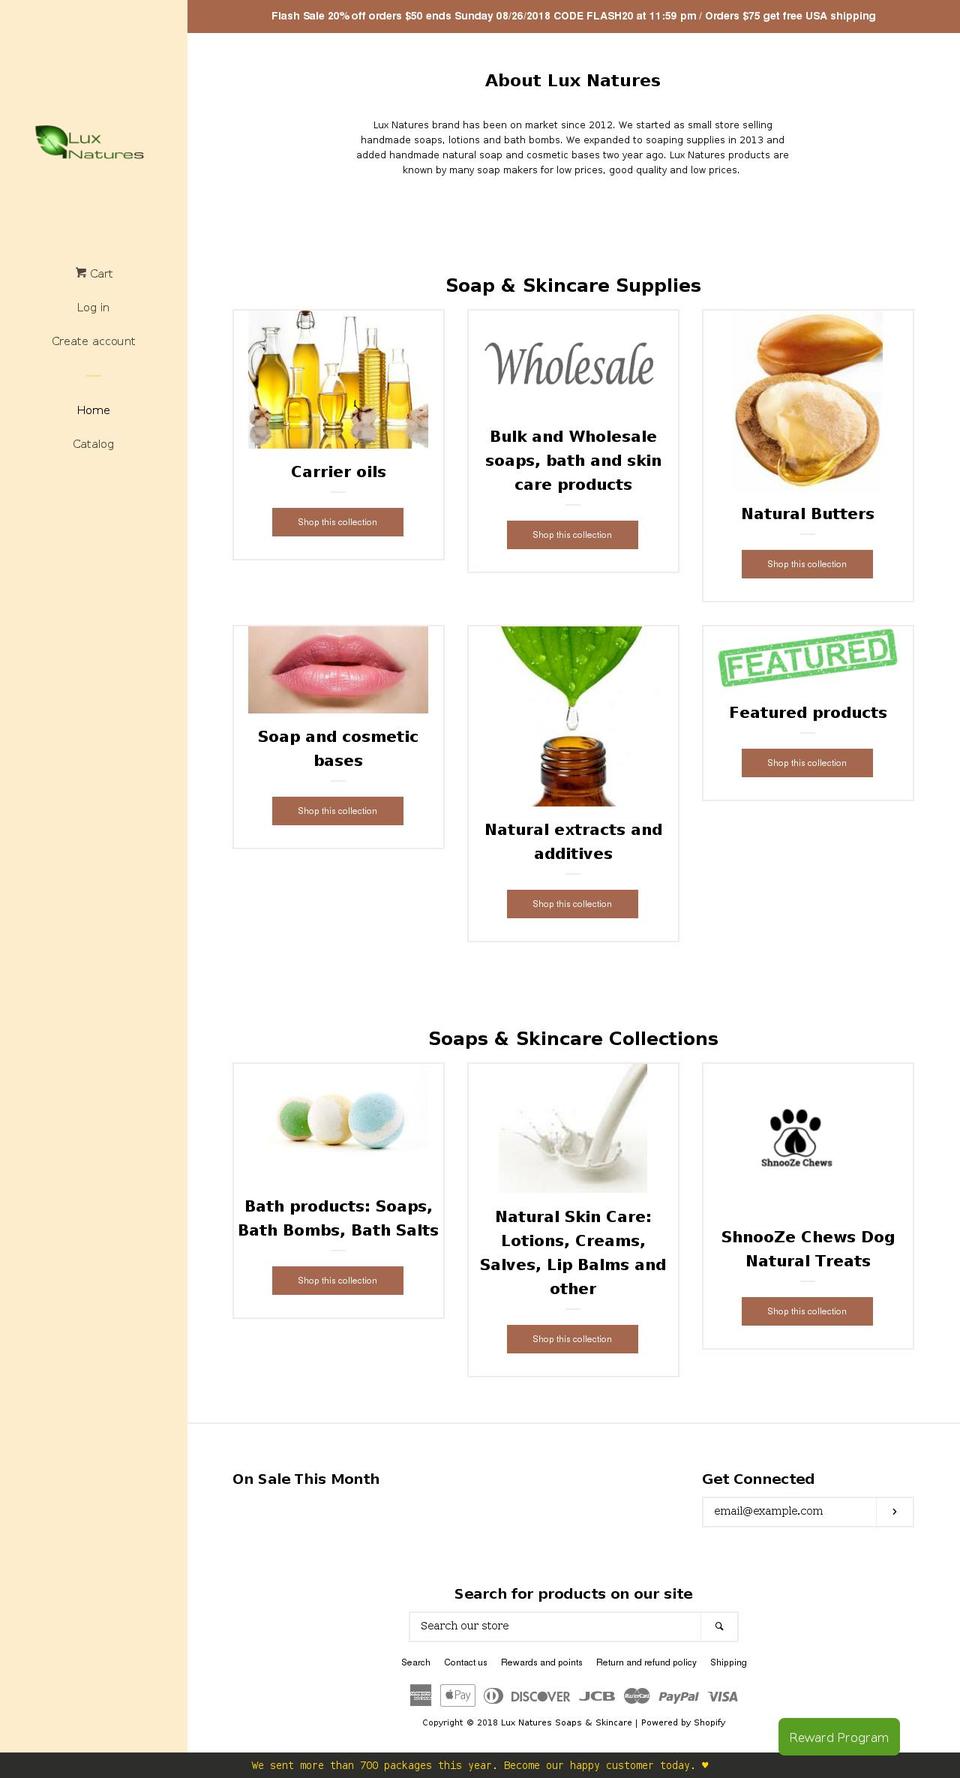 Pop with Installments message Shopify theme site example luxnatures.com